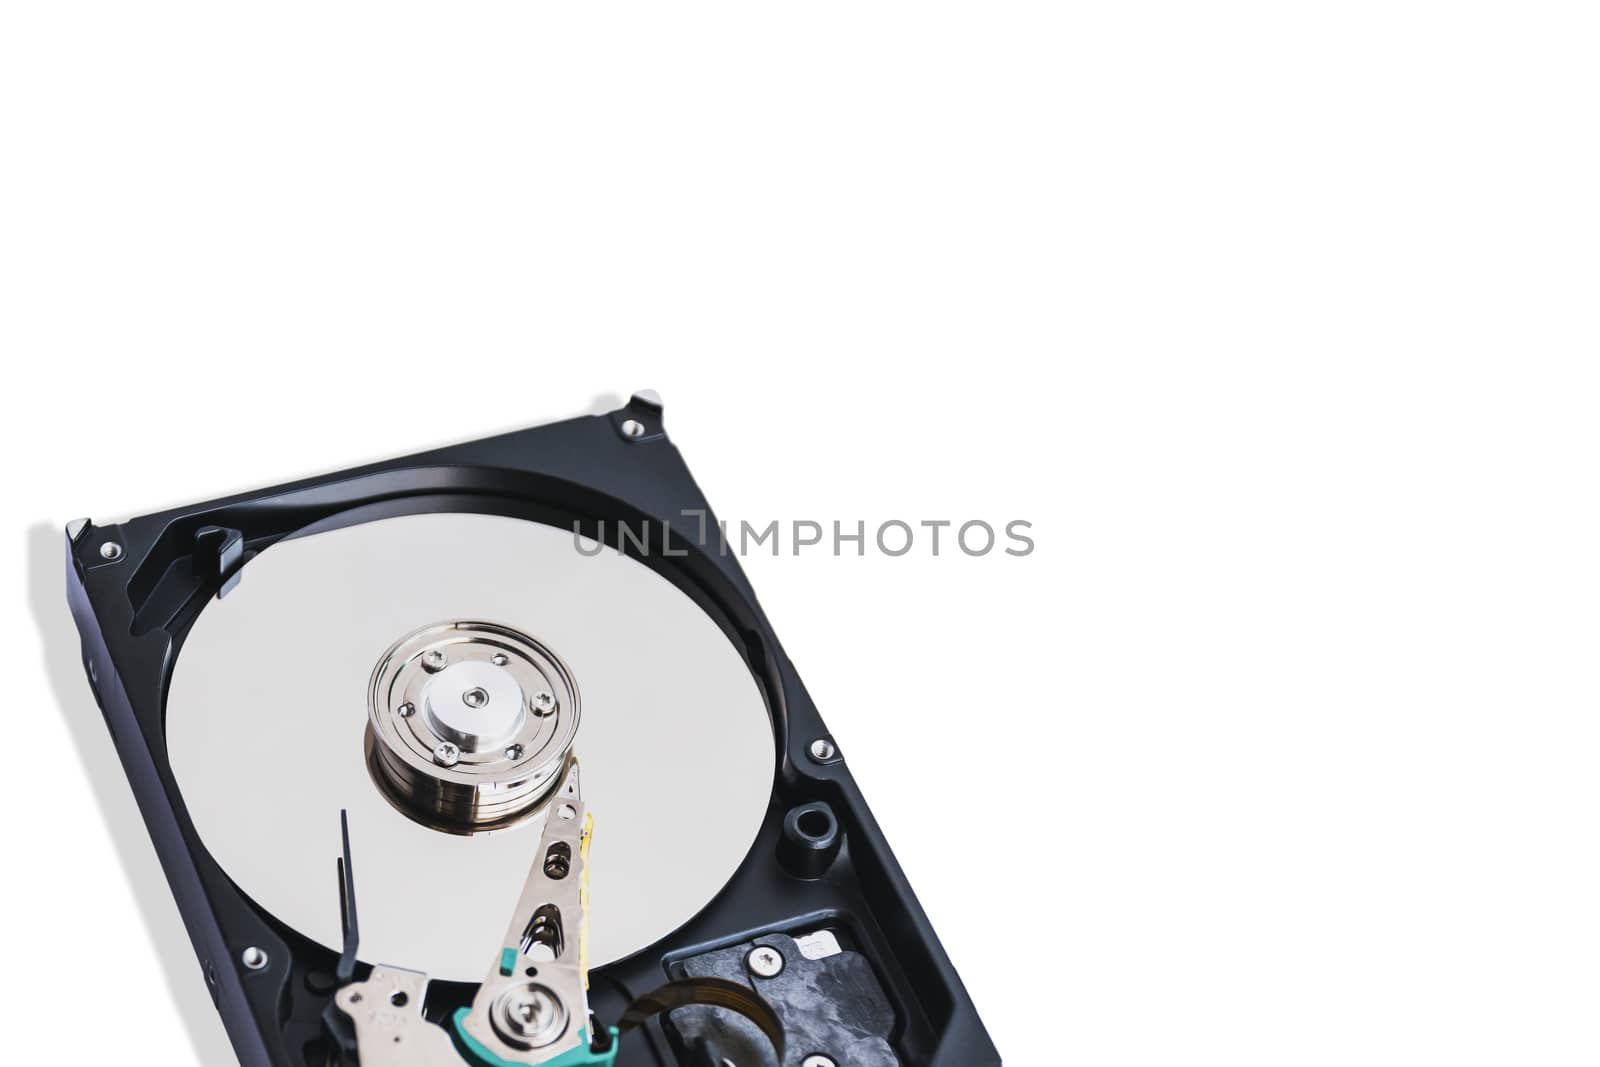 Closeup data recording media in 3.5-inch computer hard disk isolated on white background.